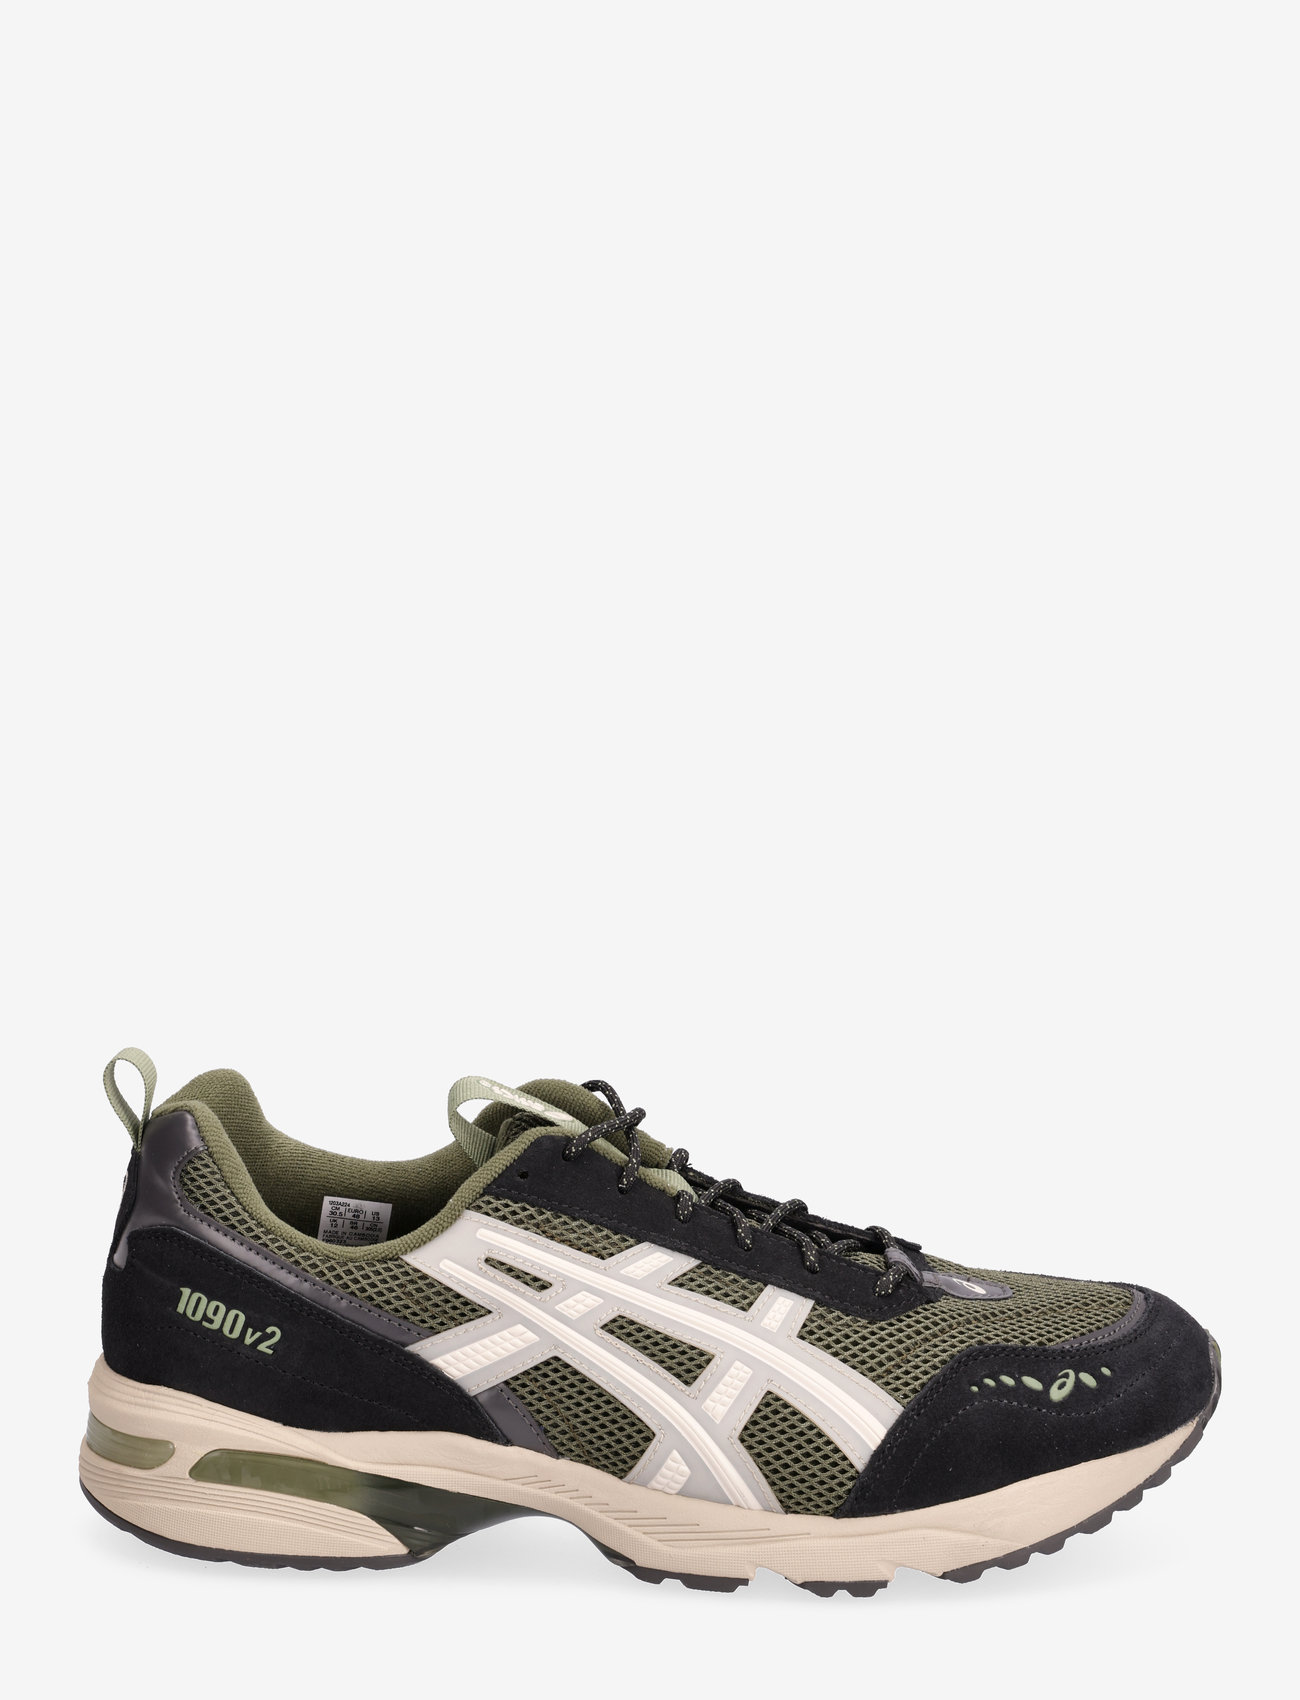 Asics - GEL-1090v2 - niedrige sneakers - forest/simply taupe - 1